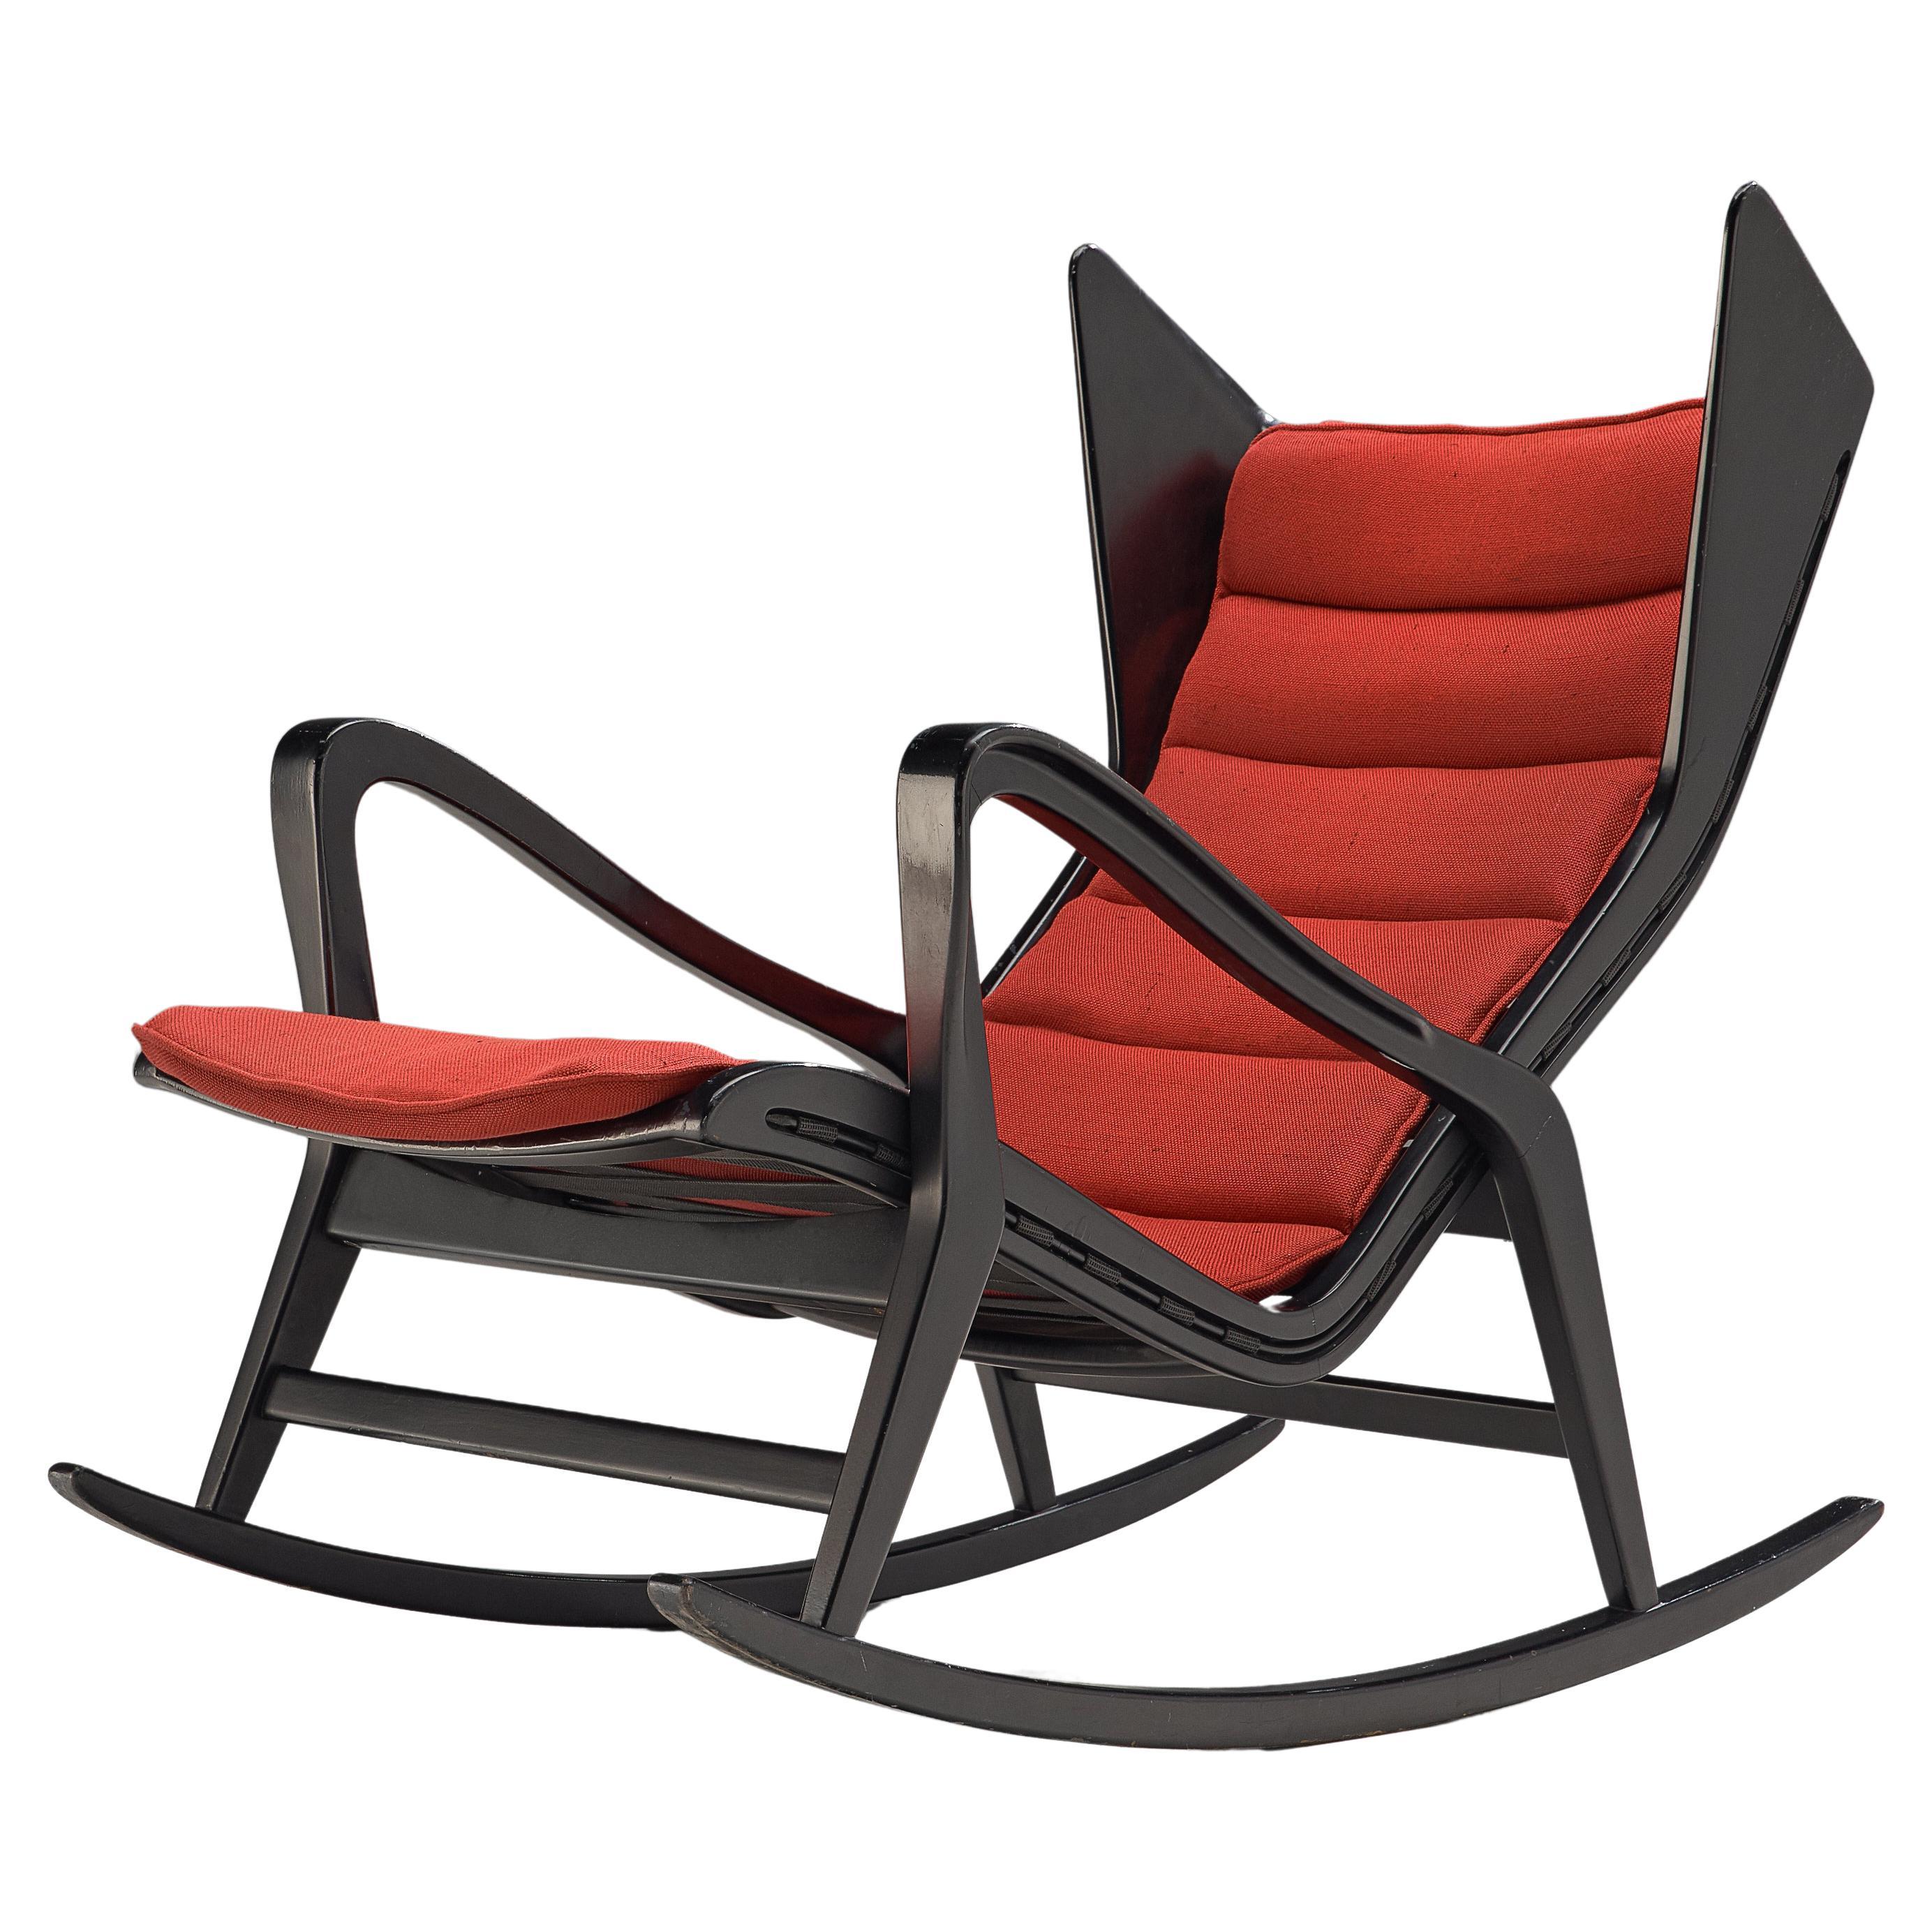 Studio Cassina '572 Rocking' Chair in Ebonized Wood and Red Upholstery For Sale